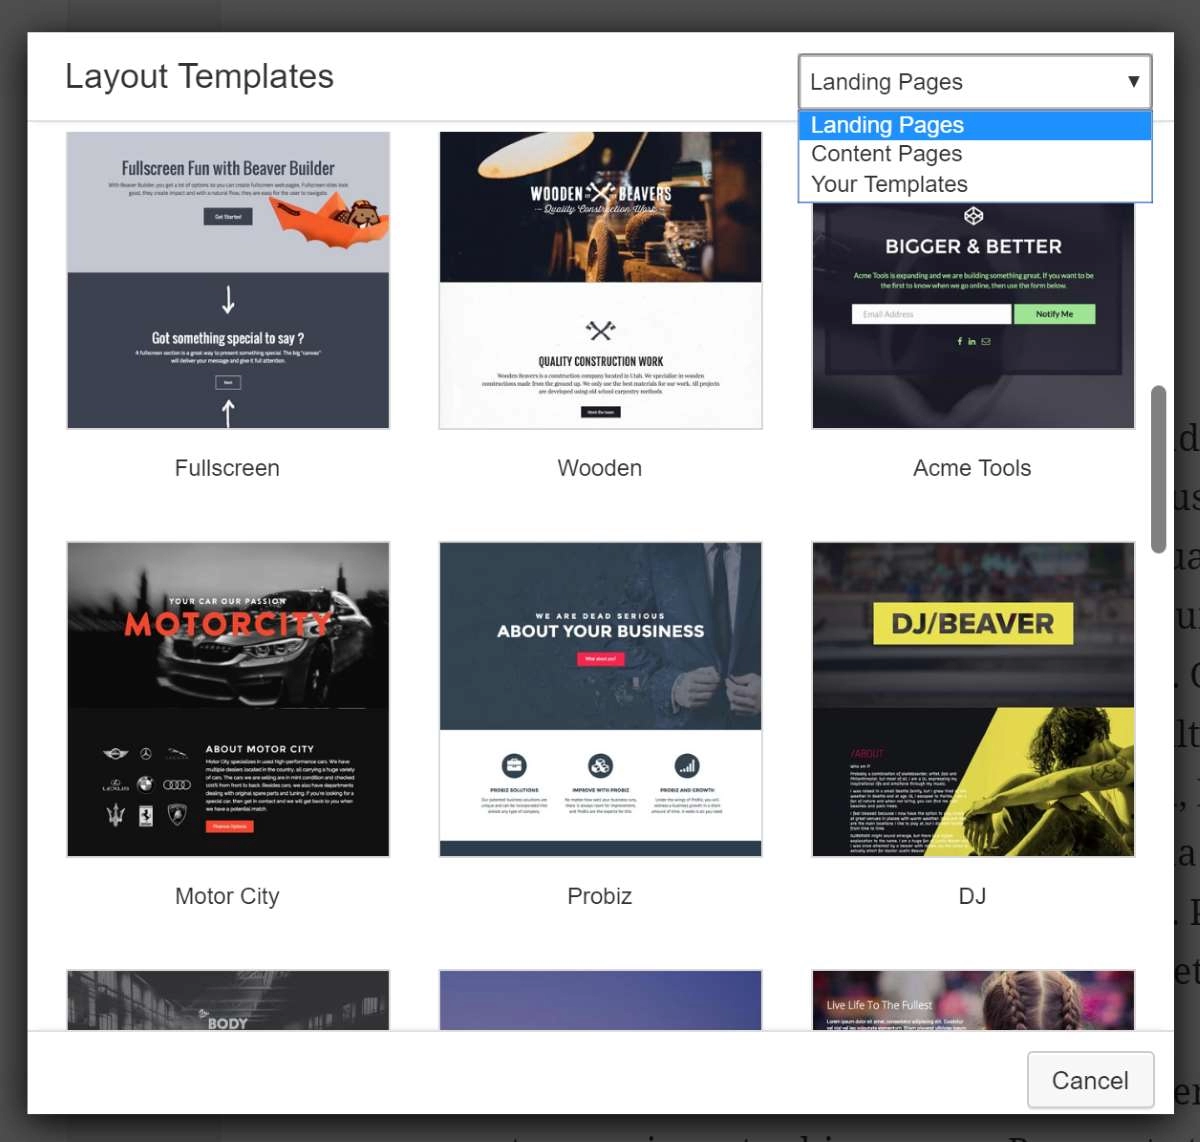 Layout templates